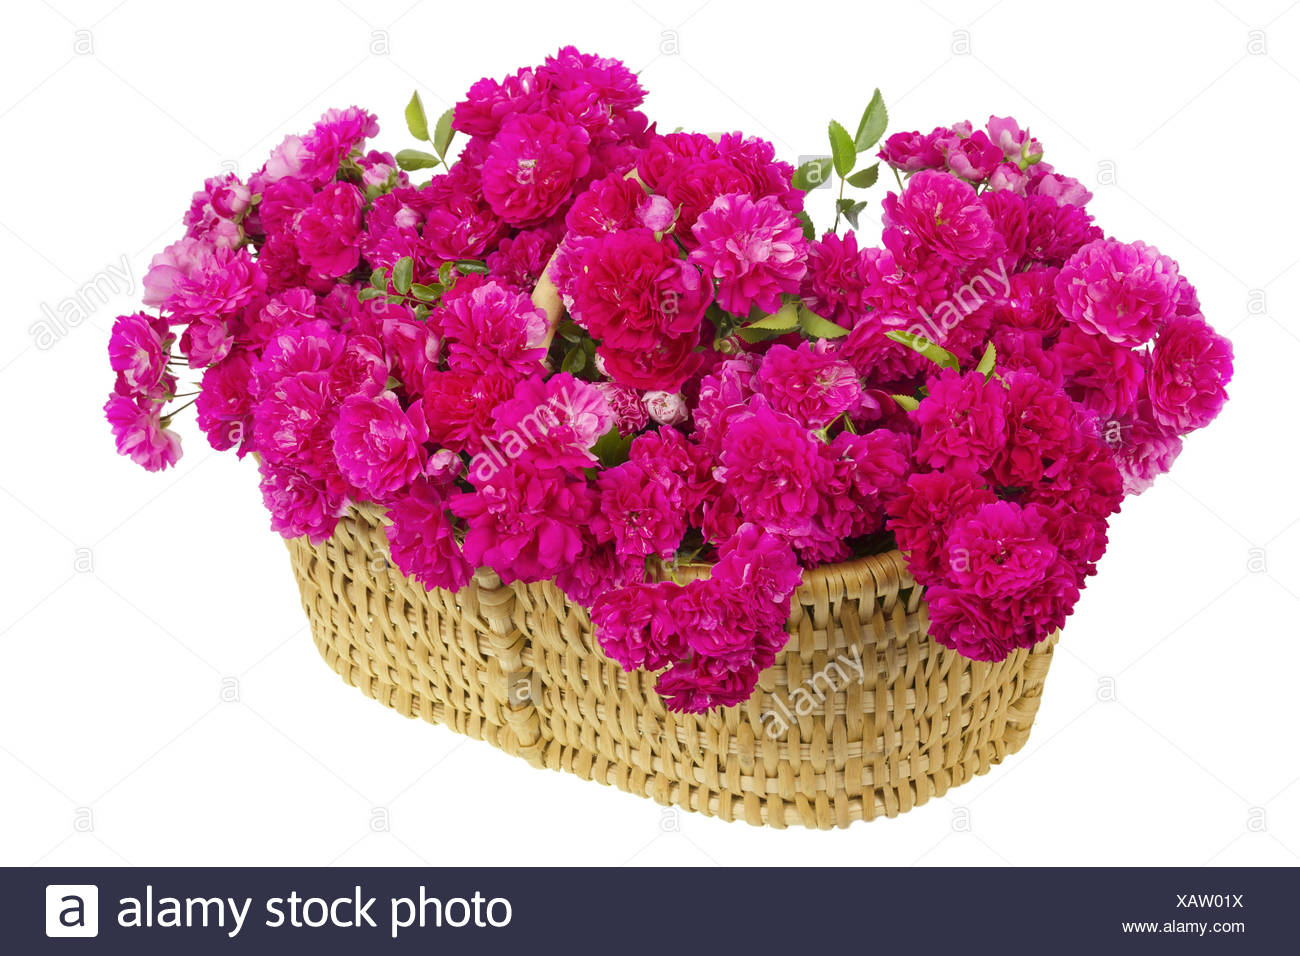 Huge Bouquet Of Pink Roses